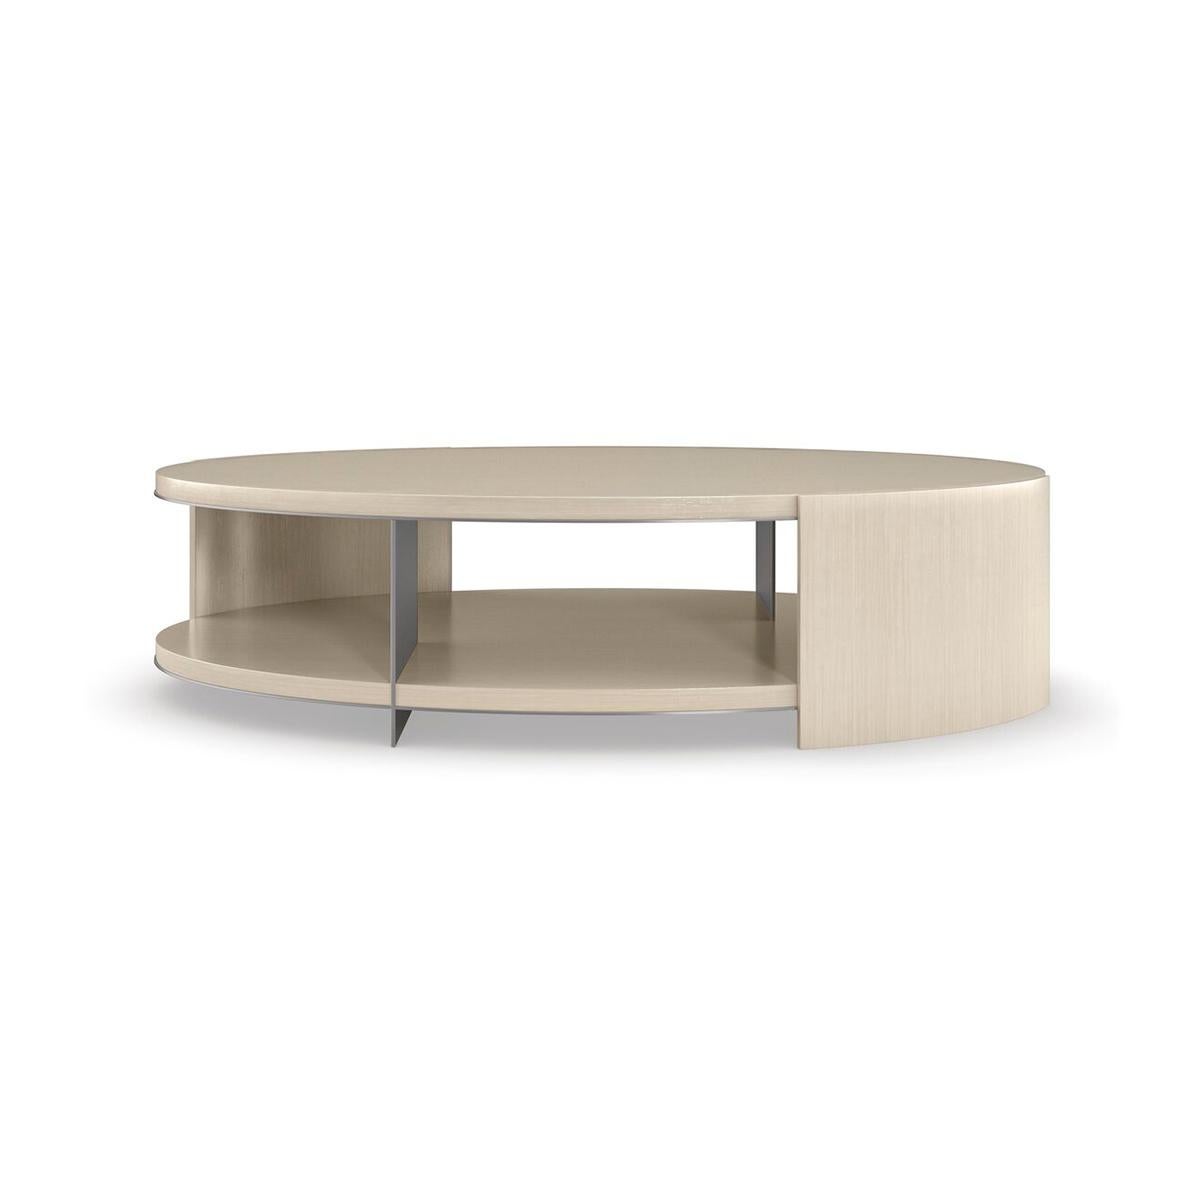 With a refined oval shape, this cocktail table is a captivating addition to living interiors. Elevating its simple form, a Thunder finish gives light to the linear wood grain, accentuated by metal trim in soft silver paint.

Like a work of art,